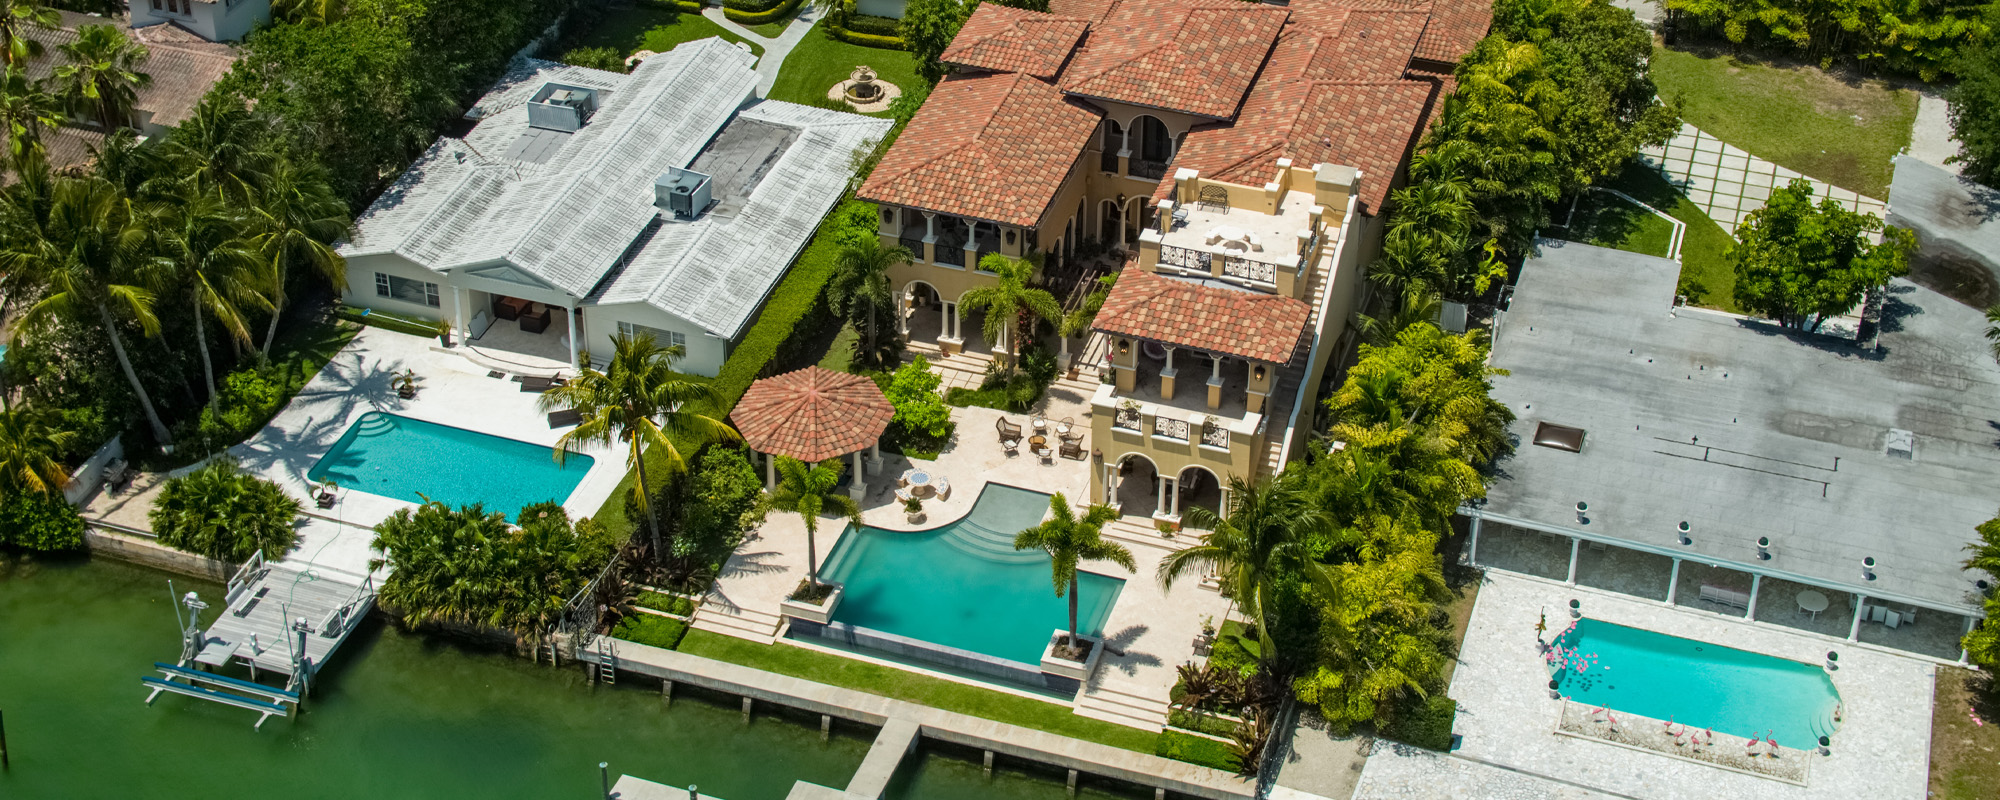 Aerial view of luxury mansions